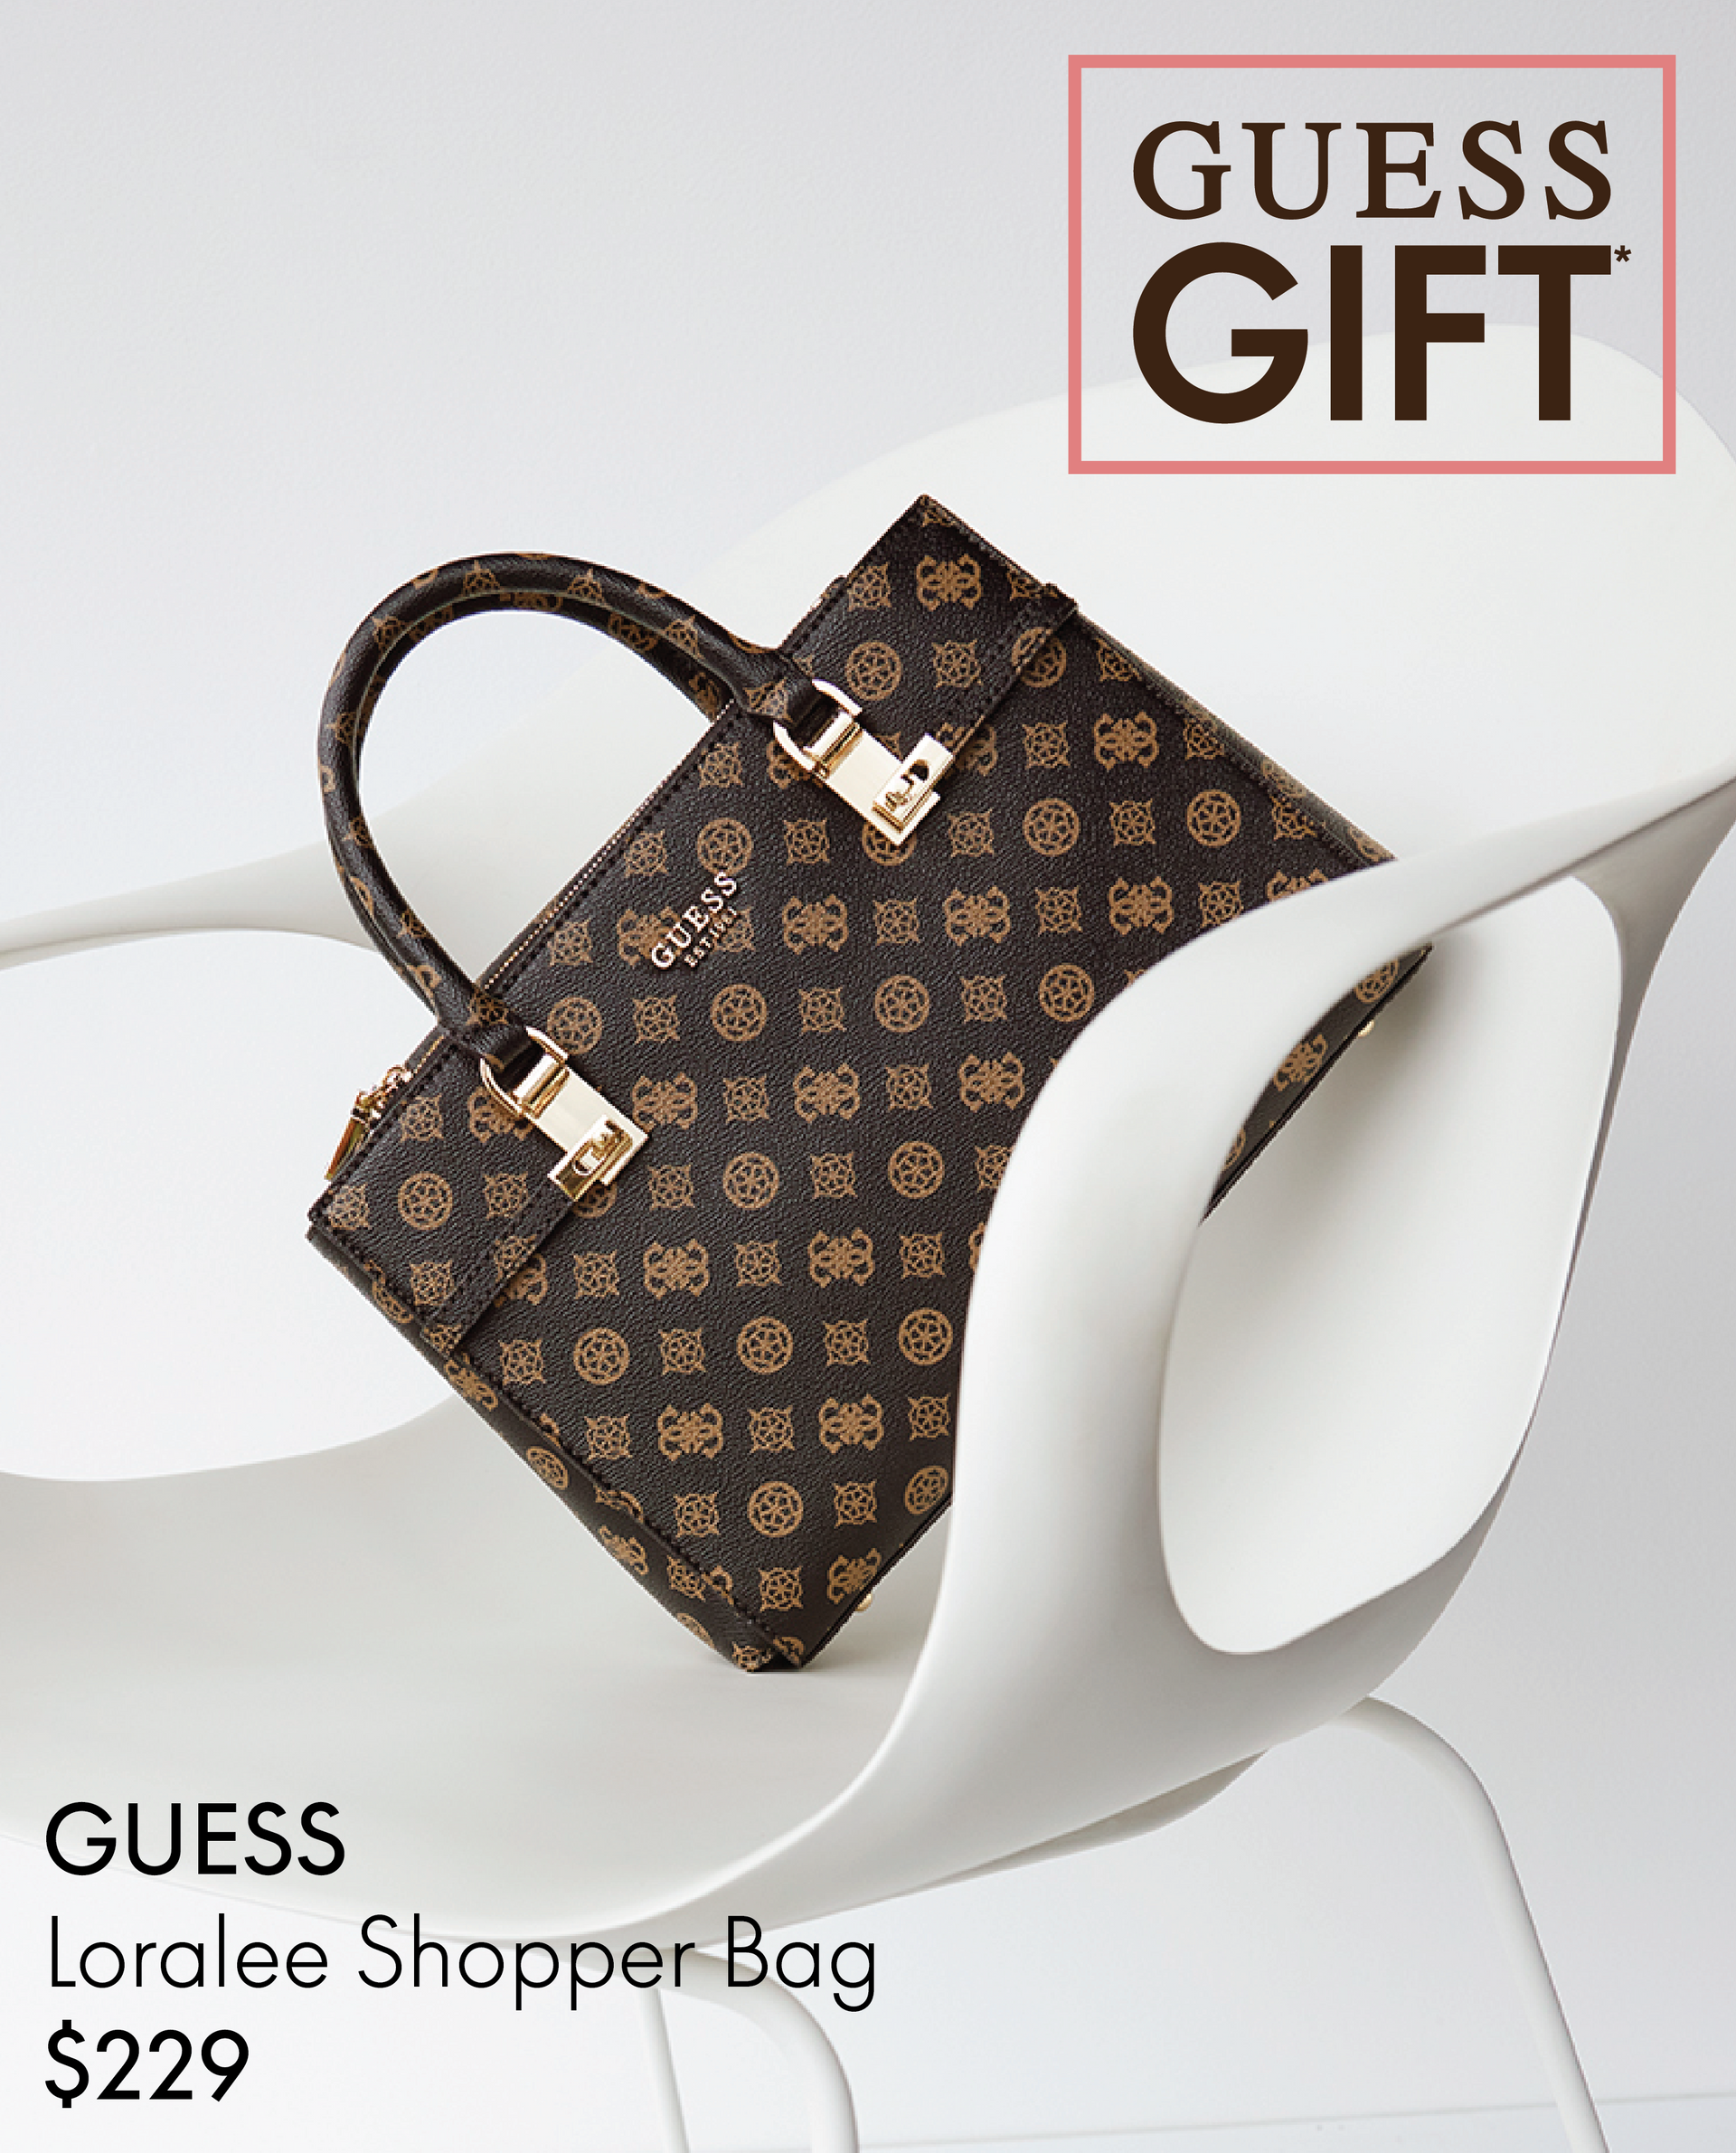 <font size="6">RECIEVE A GUESS GIFT*</font><br><font size="6">WITH YOUR PURCHASE</font>